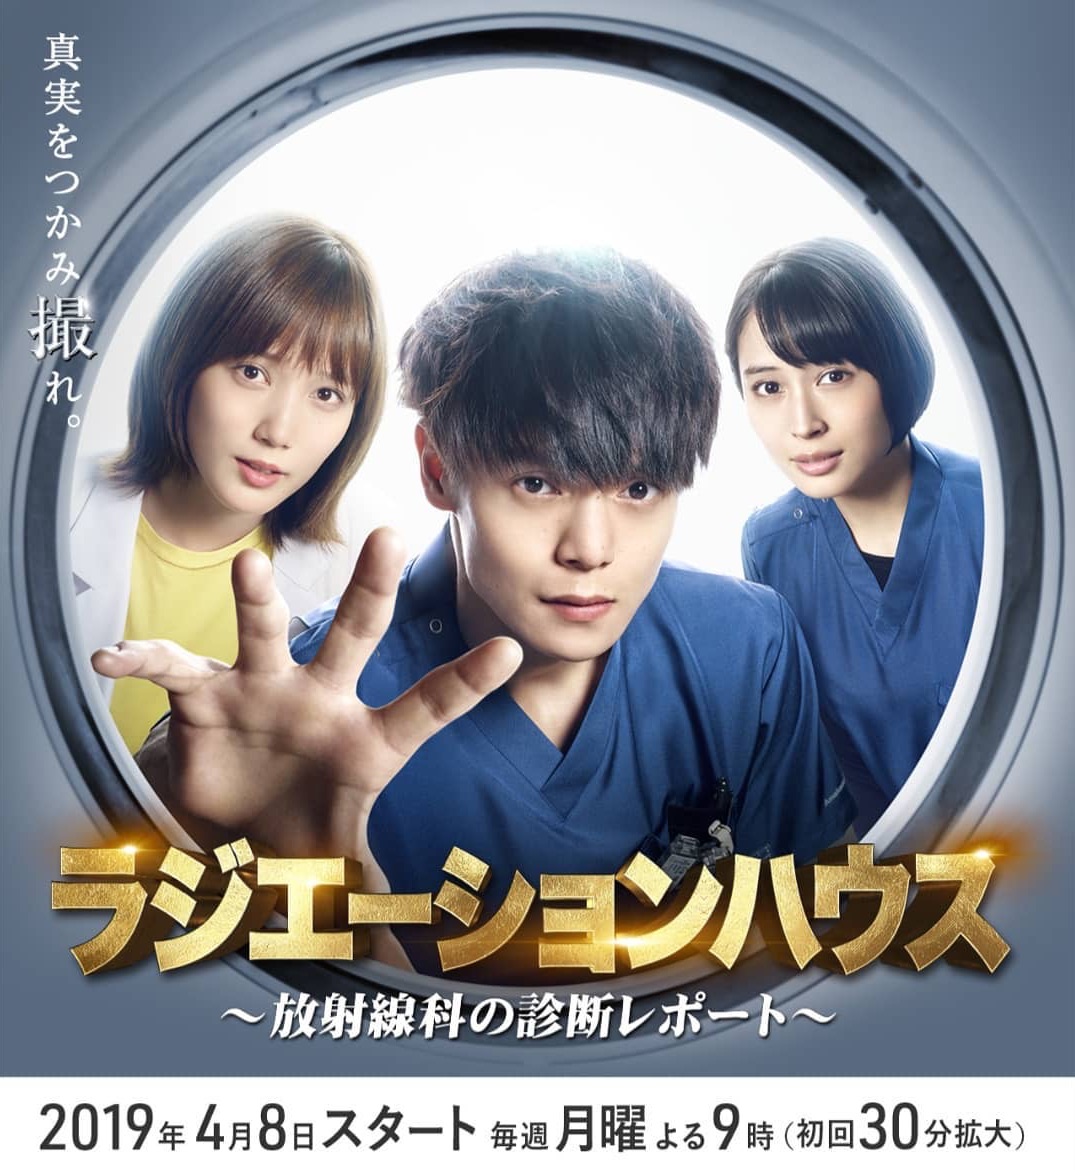 📺 Japanese Tv Series Review: Radiation House (ラジエーションハウス)